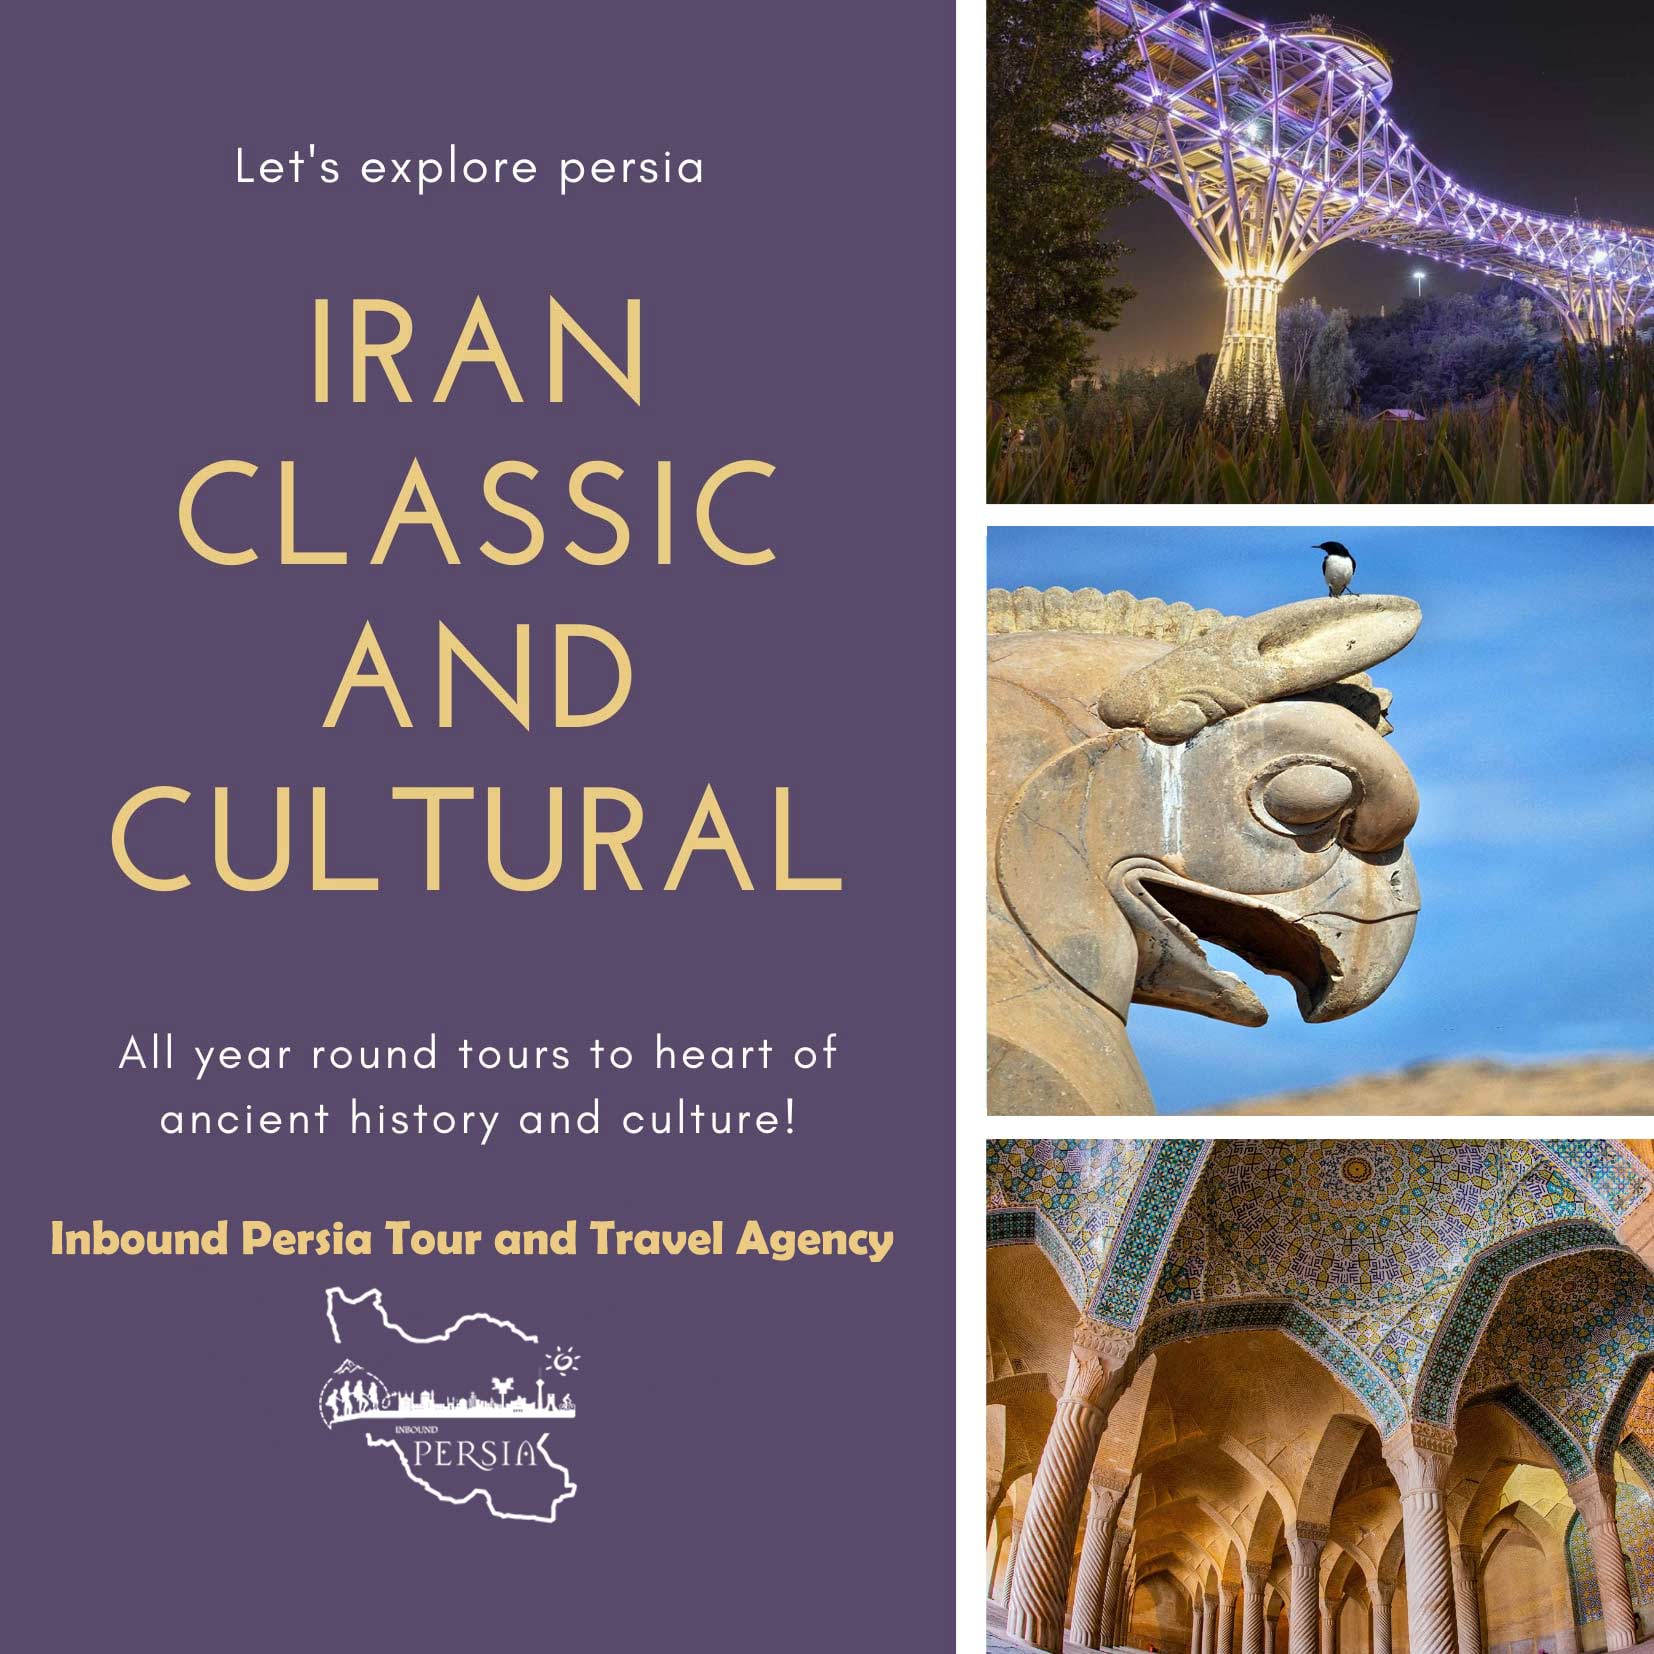 Iran classic and cultural tour